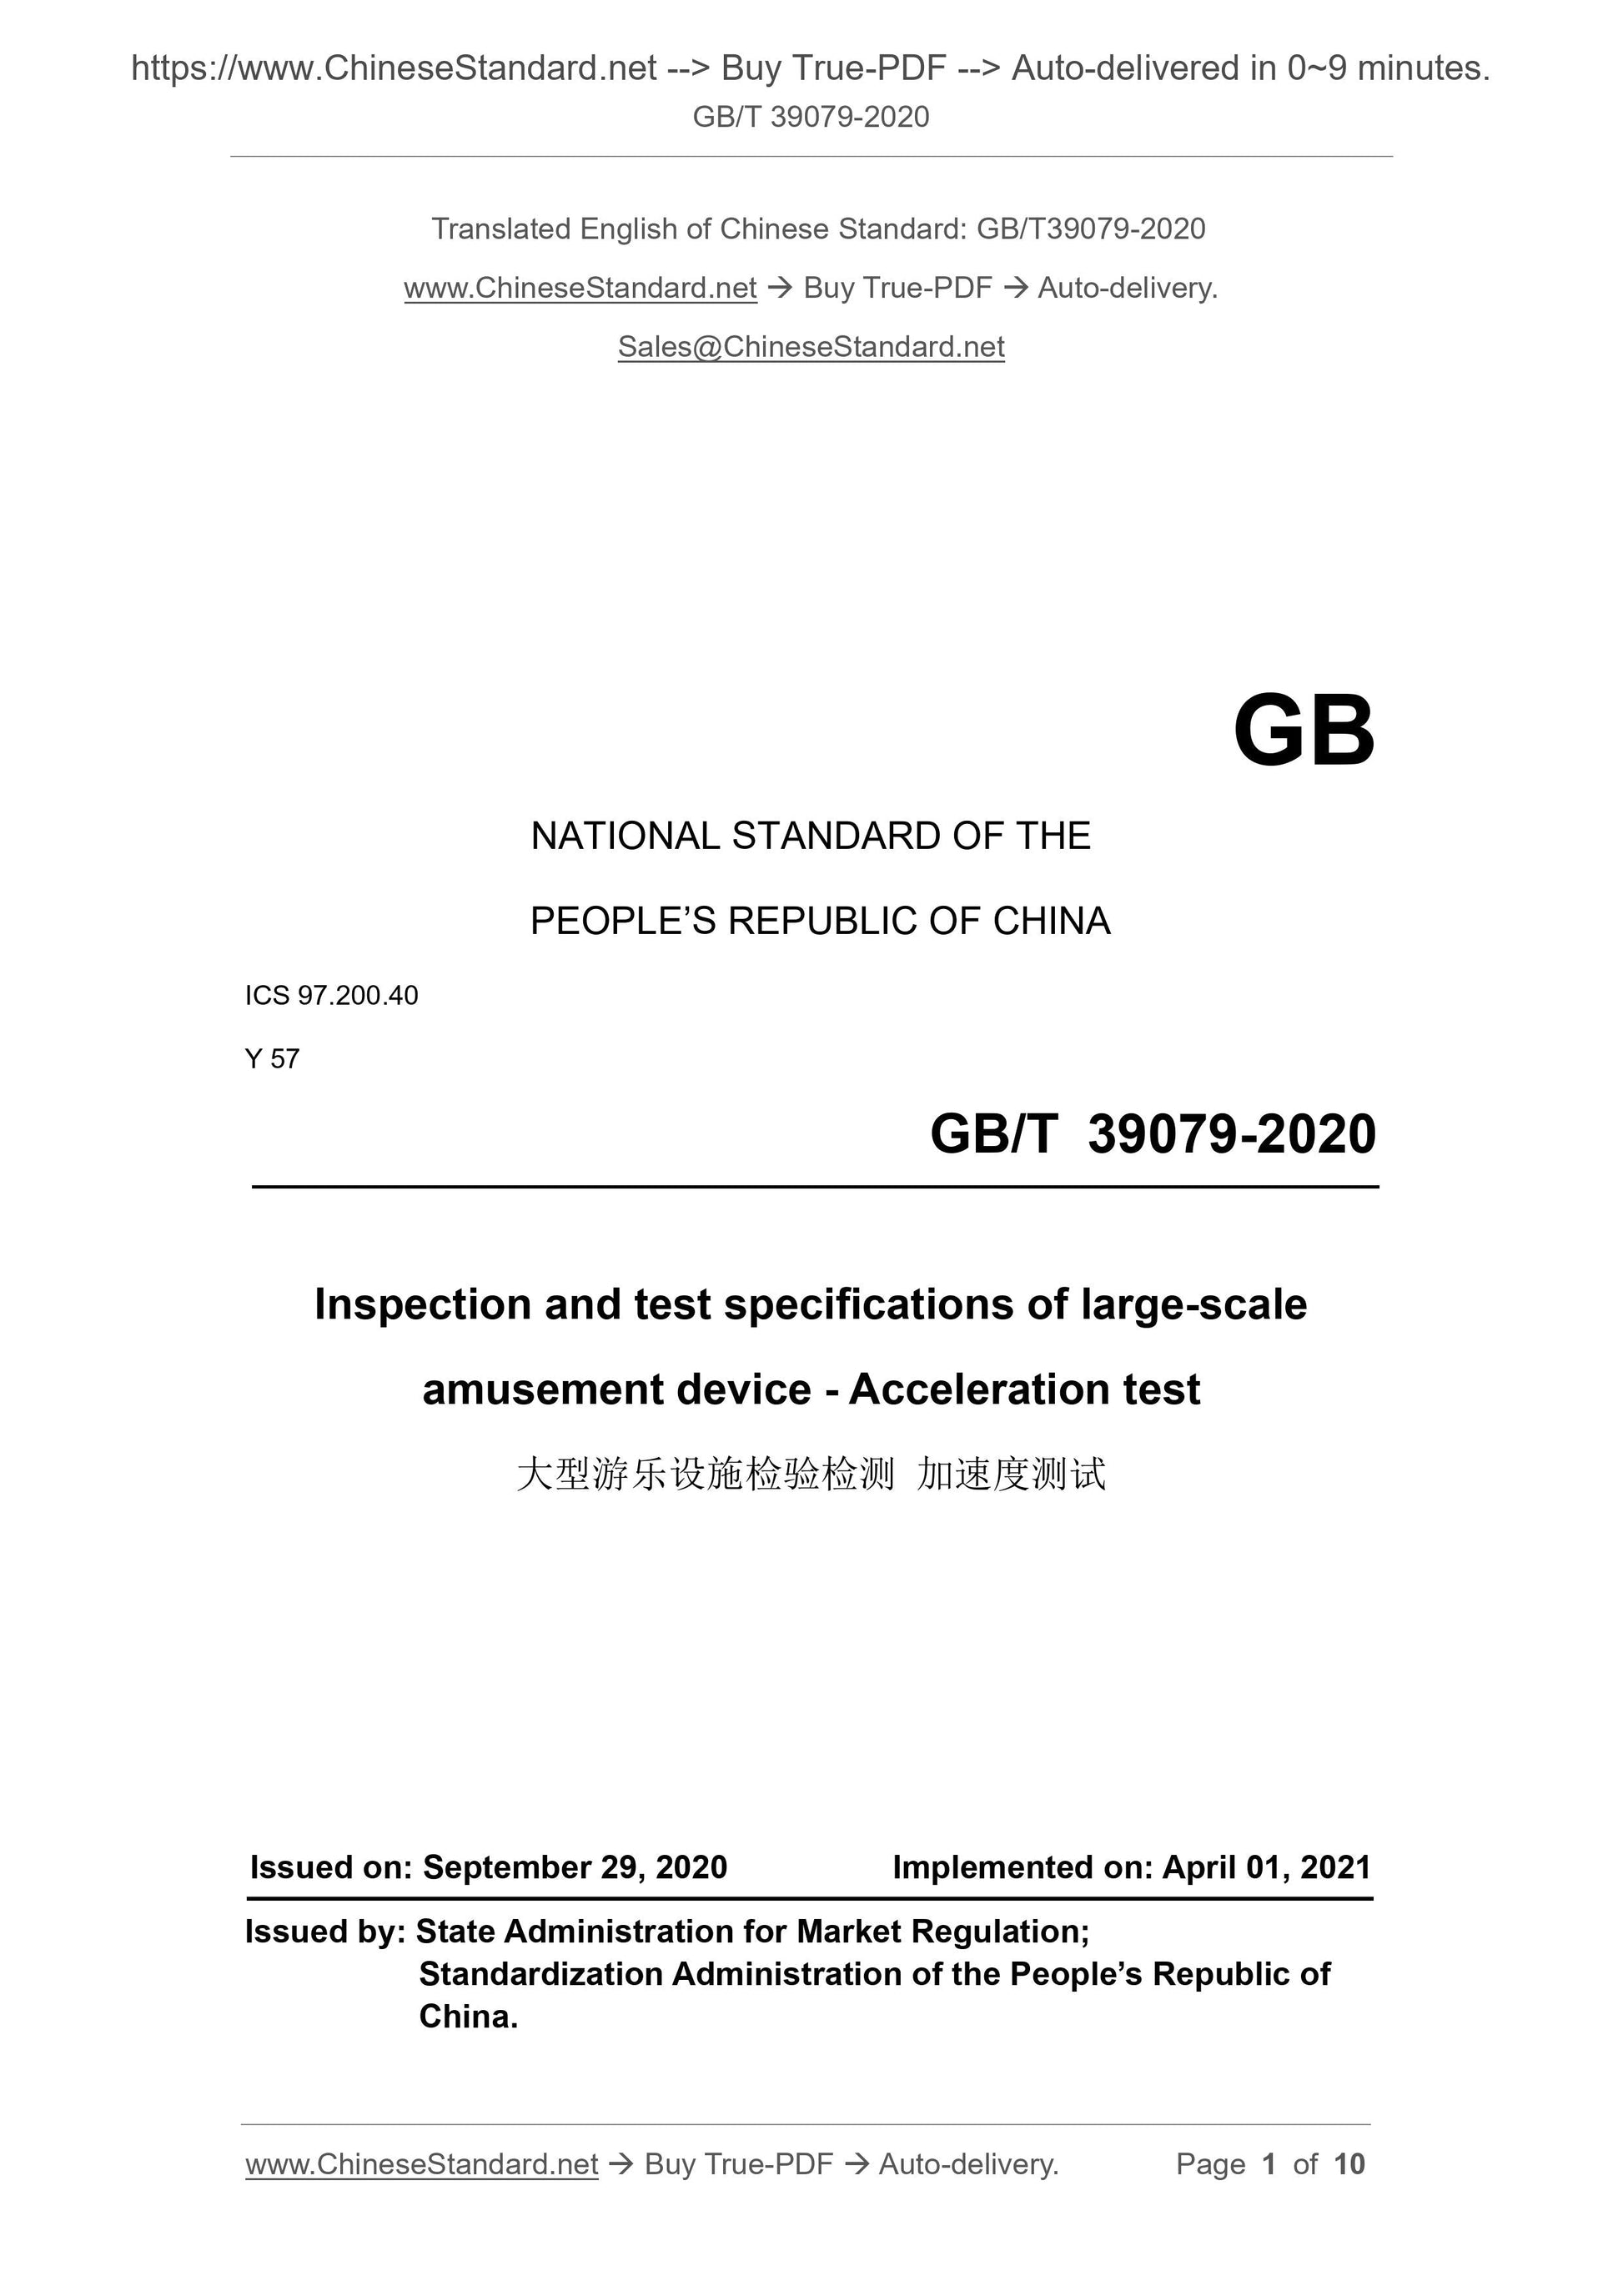 GB/T 39079-2020 Page 1